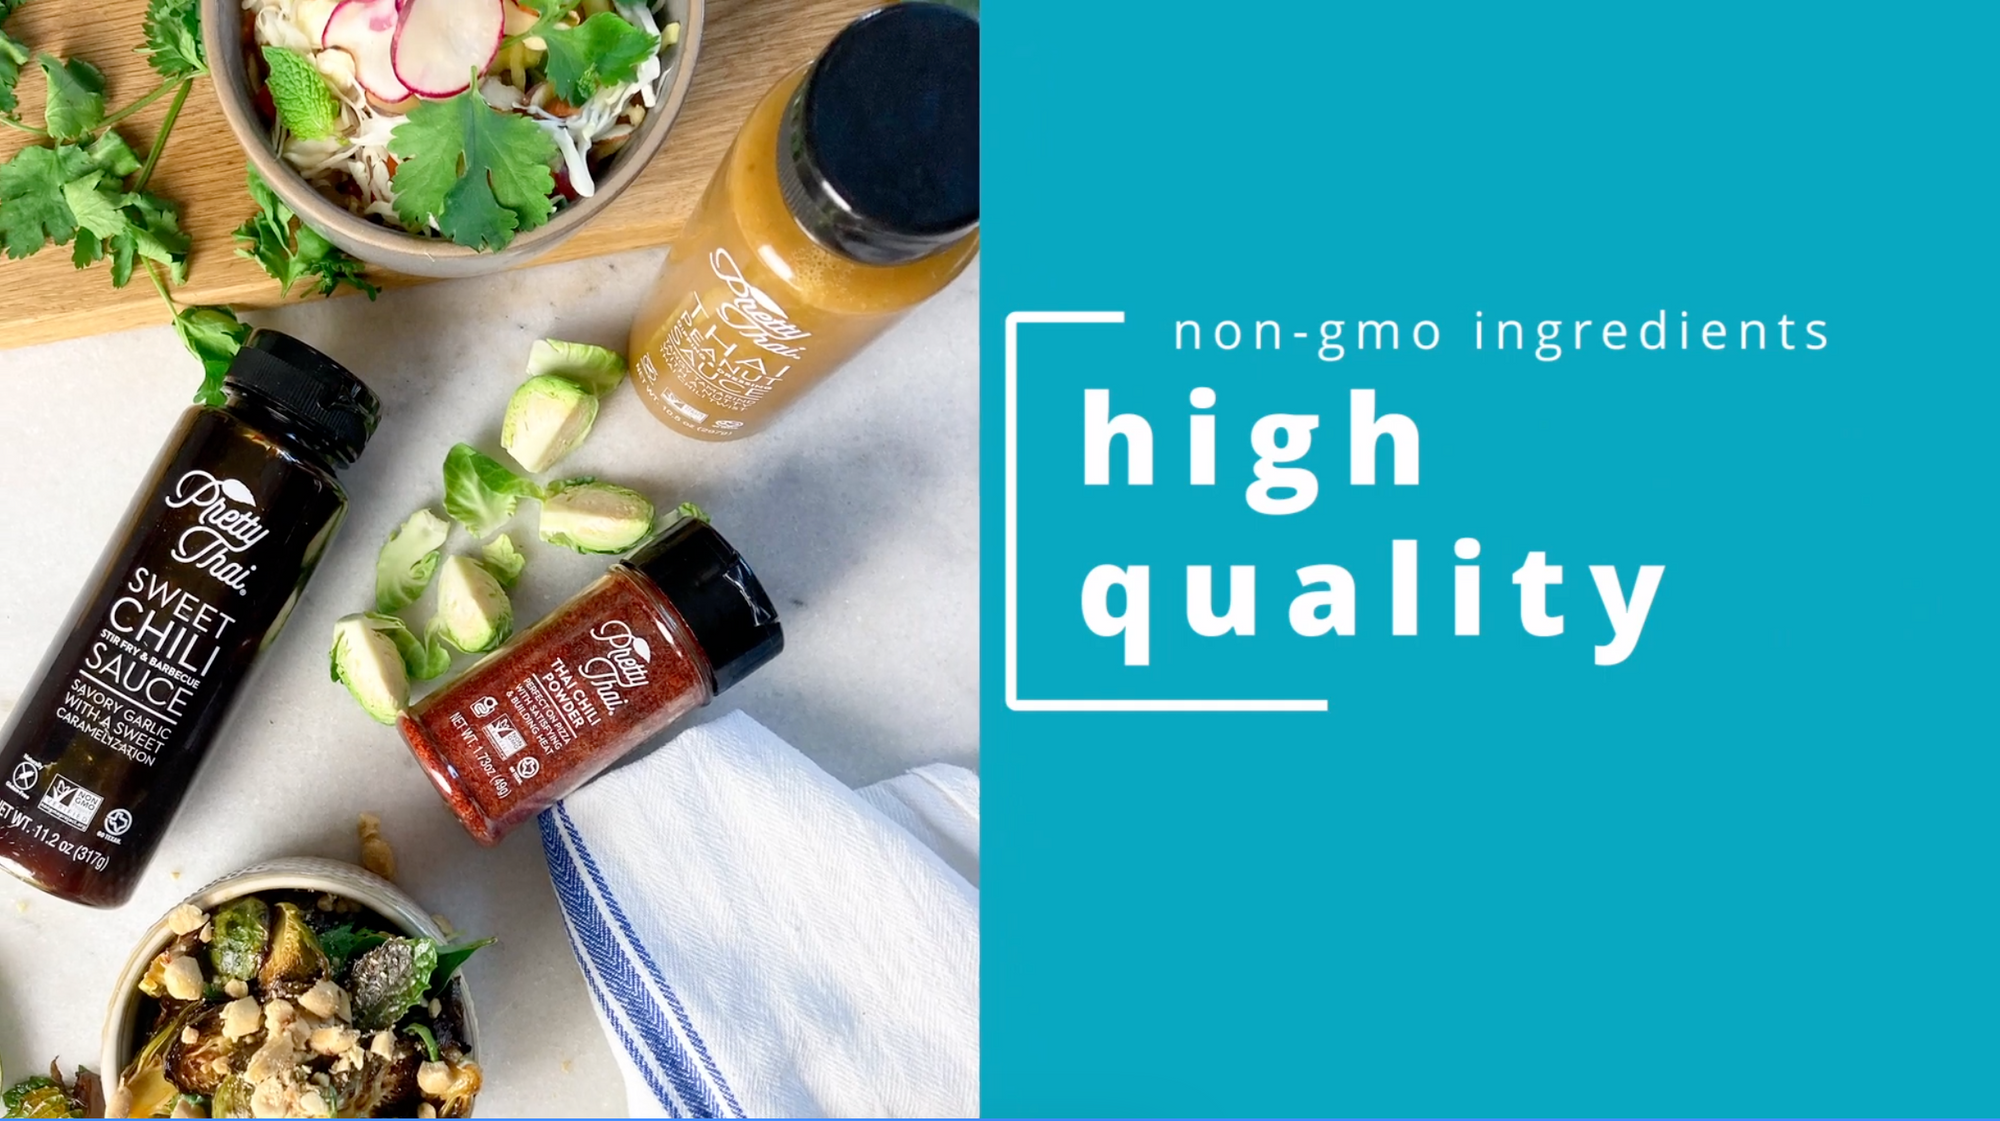 A split image can be seen in which white text is written on blue background on right side and on left side there are 3 bottles of Pretty Thai sauces with two bowls 